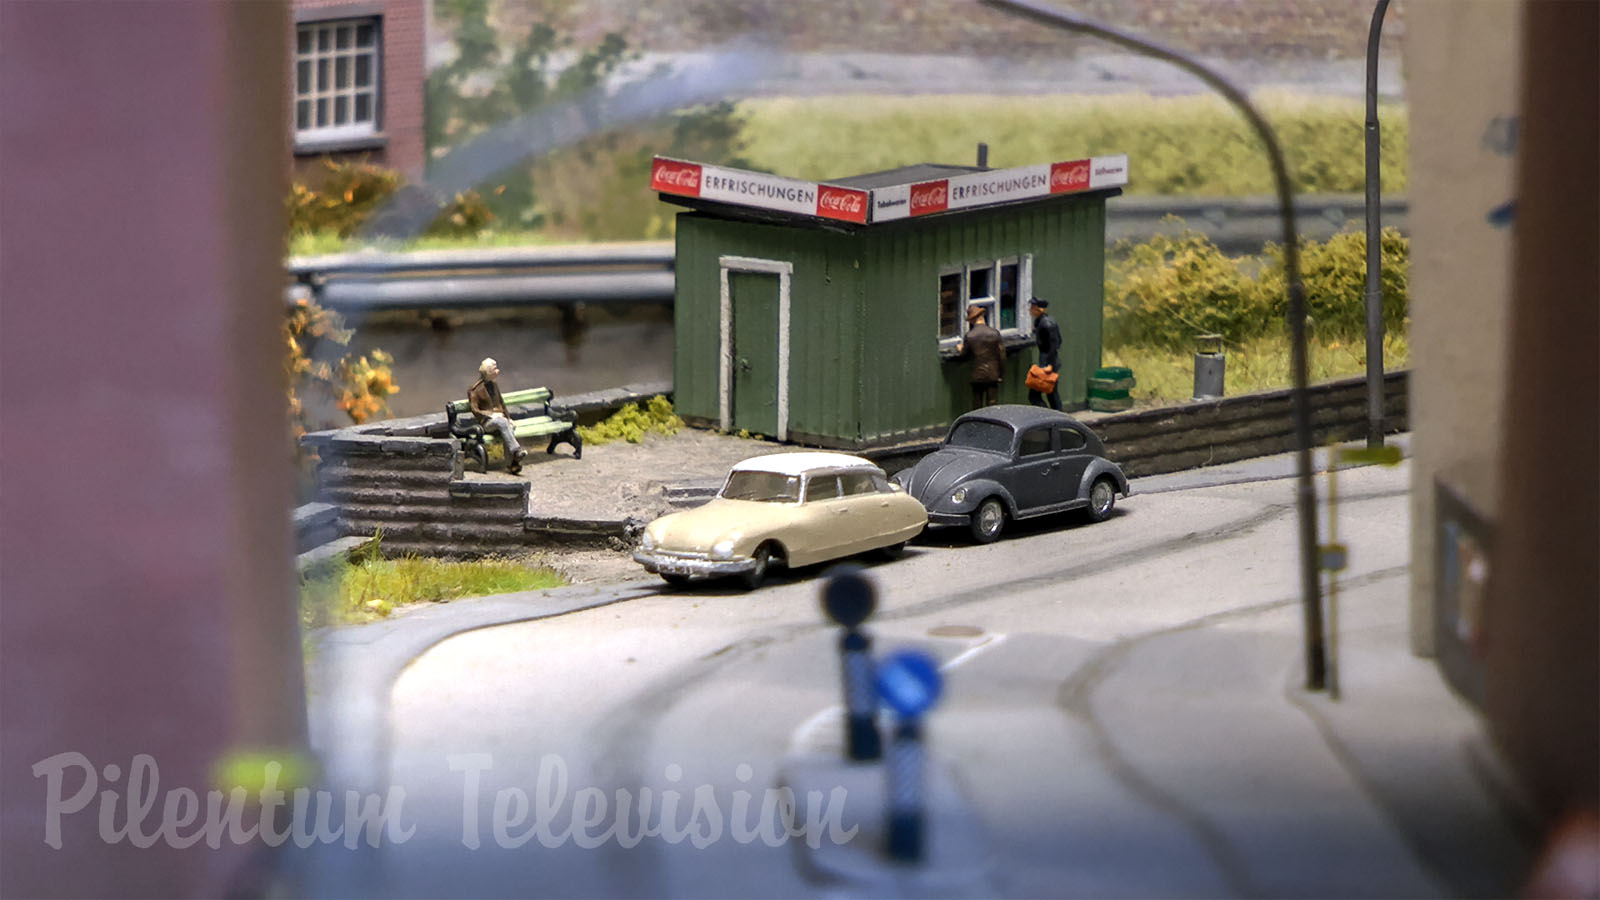 N scale model train layout with Magnorail miniature cars and locomotives by Arnold and Hobbytrain